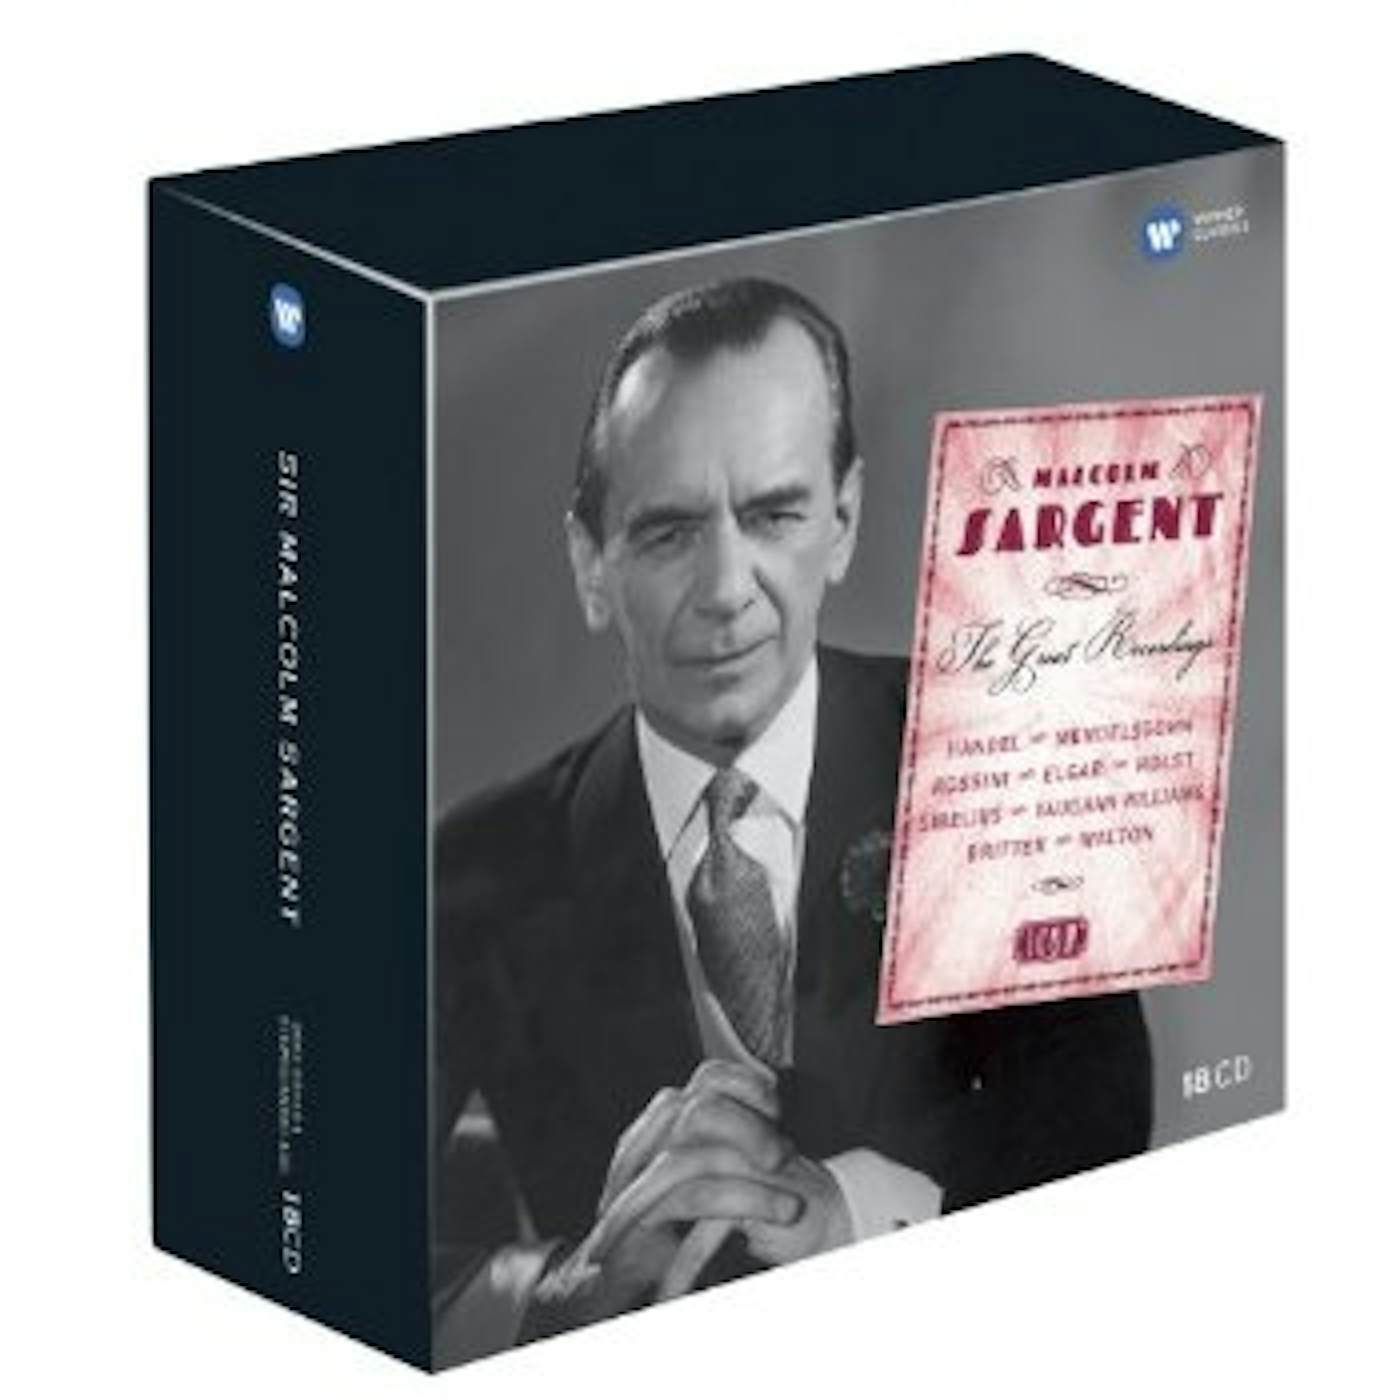 Malcolm Sargent ICON - GREAT RECORDINGS CD